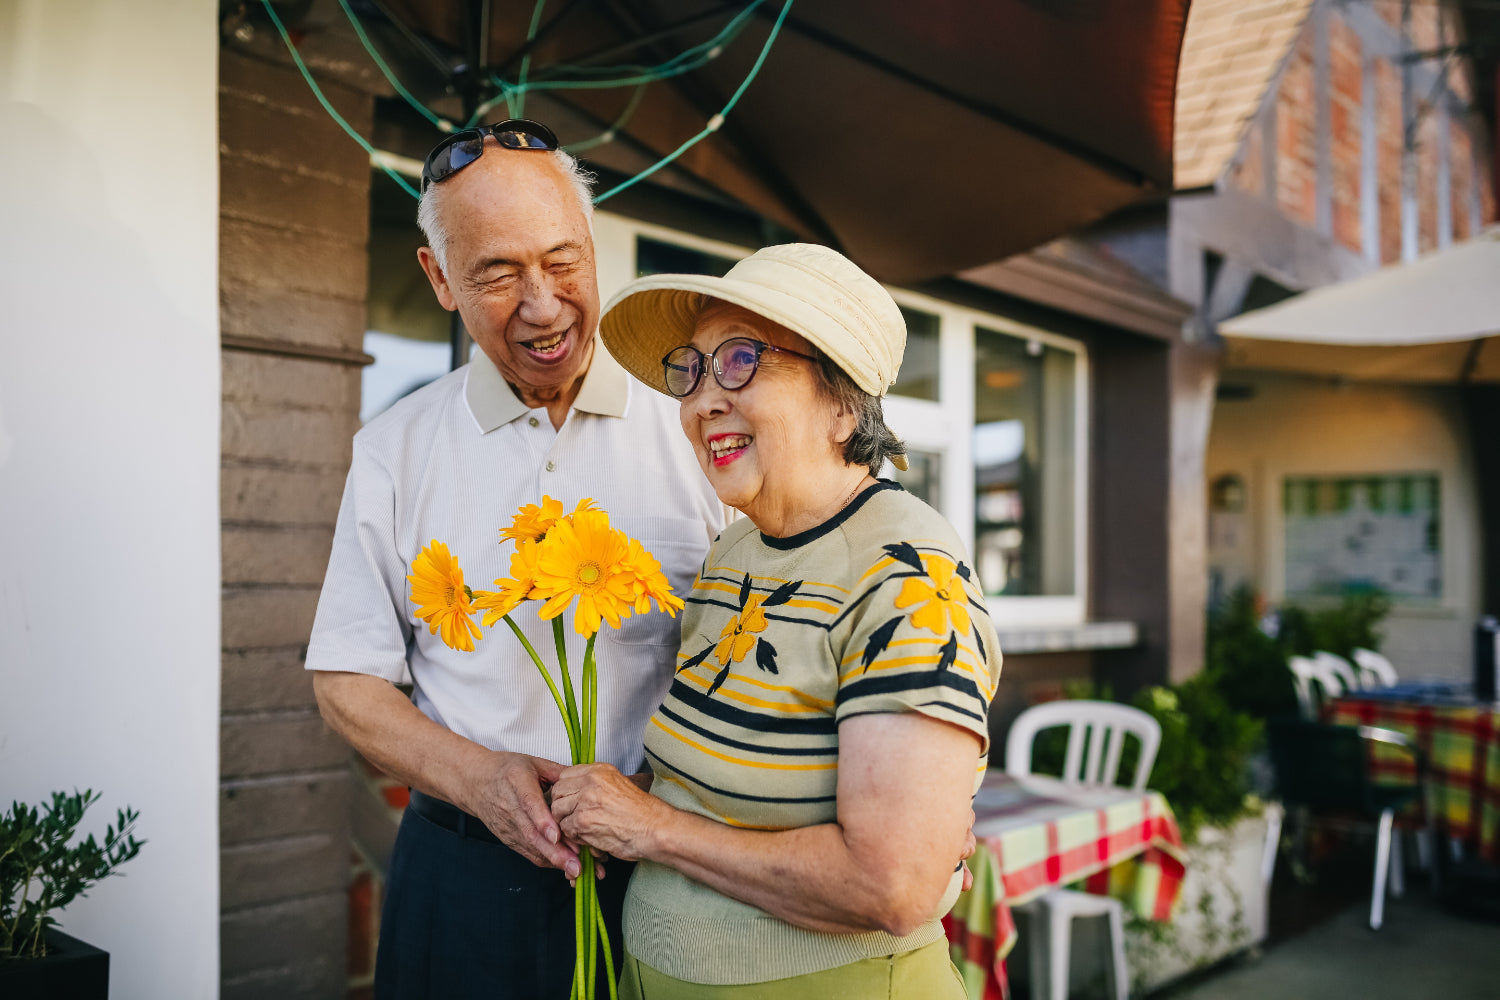 Two older people walk on a sidewalk with one holding flowers